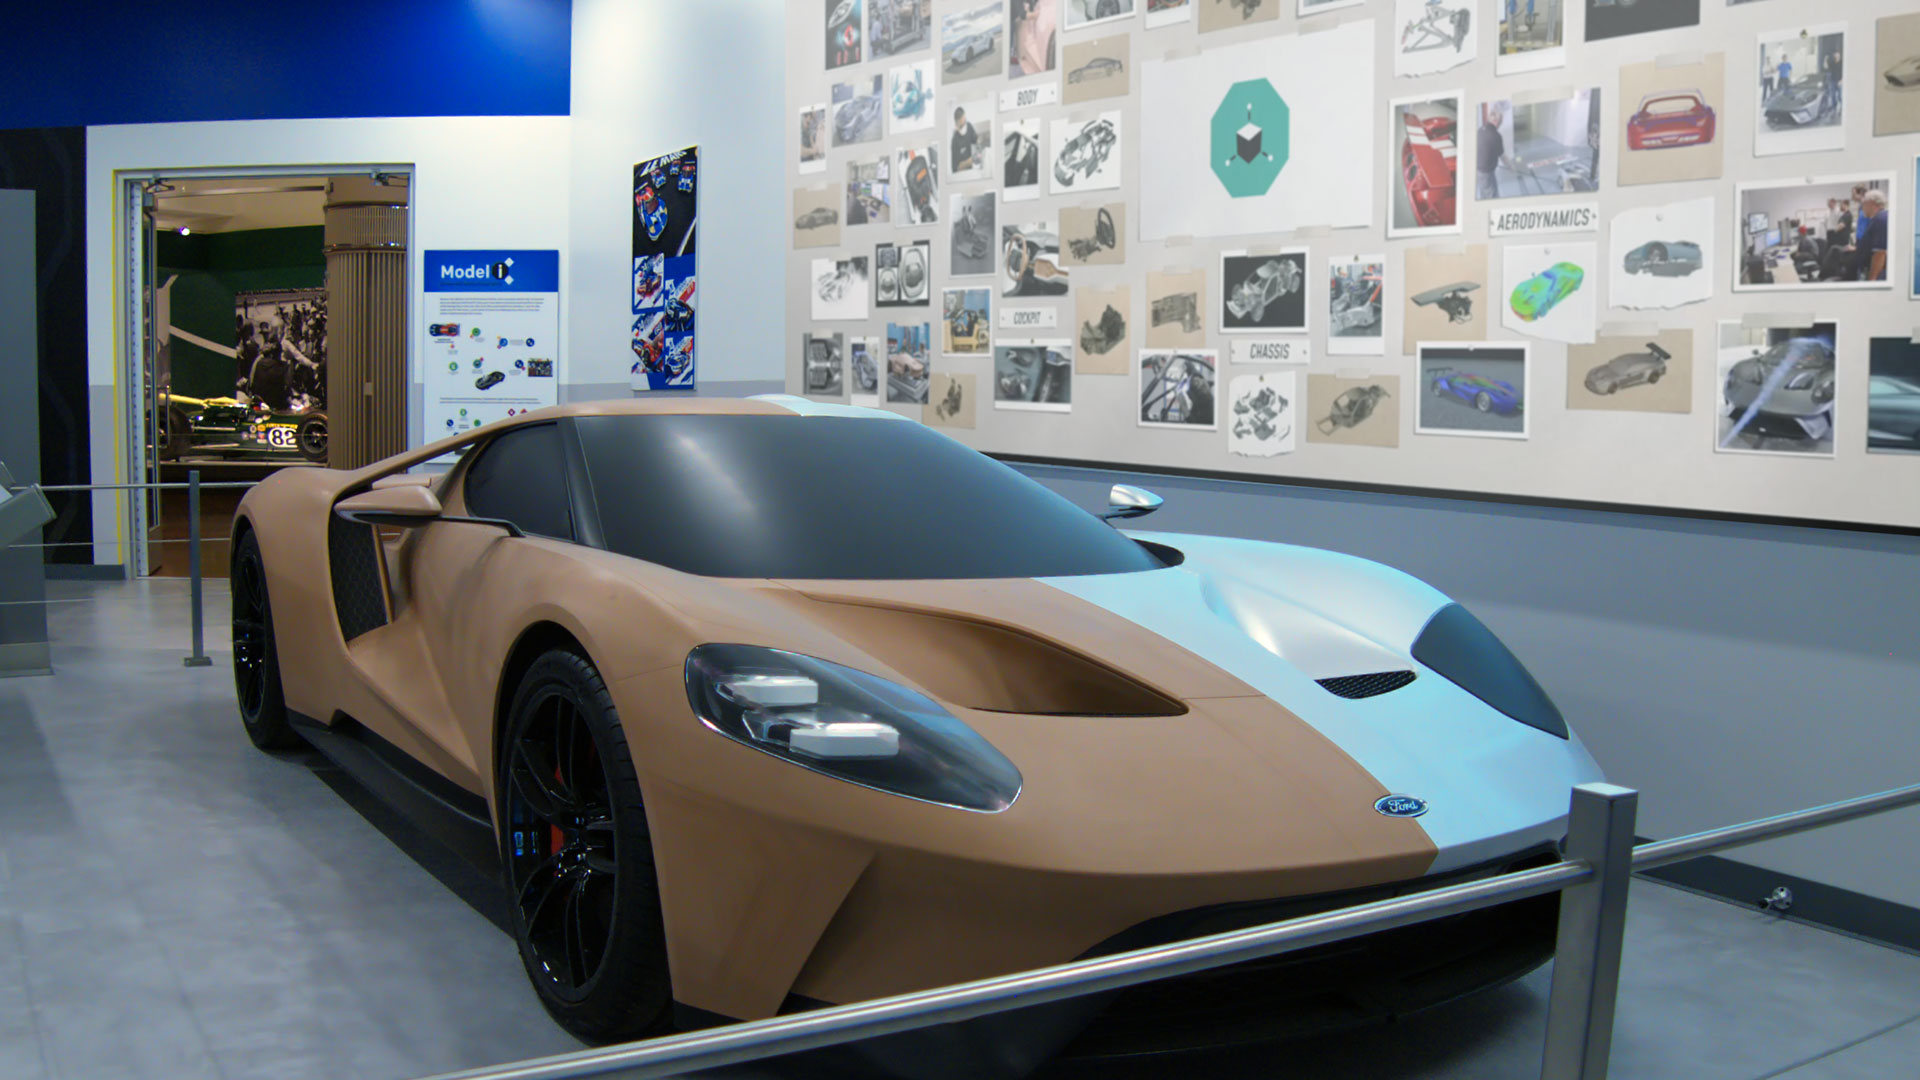 The Design Board video zooms into a wall of reference photos to highlight the process and inspirations behind the Ford 2016 GT.